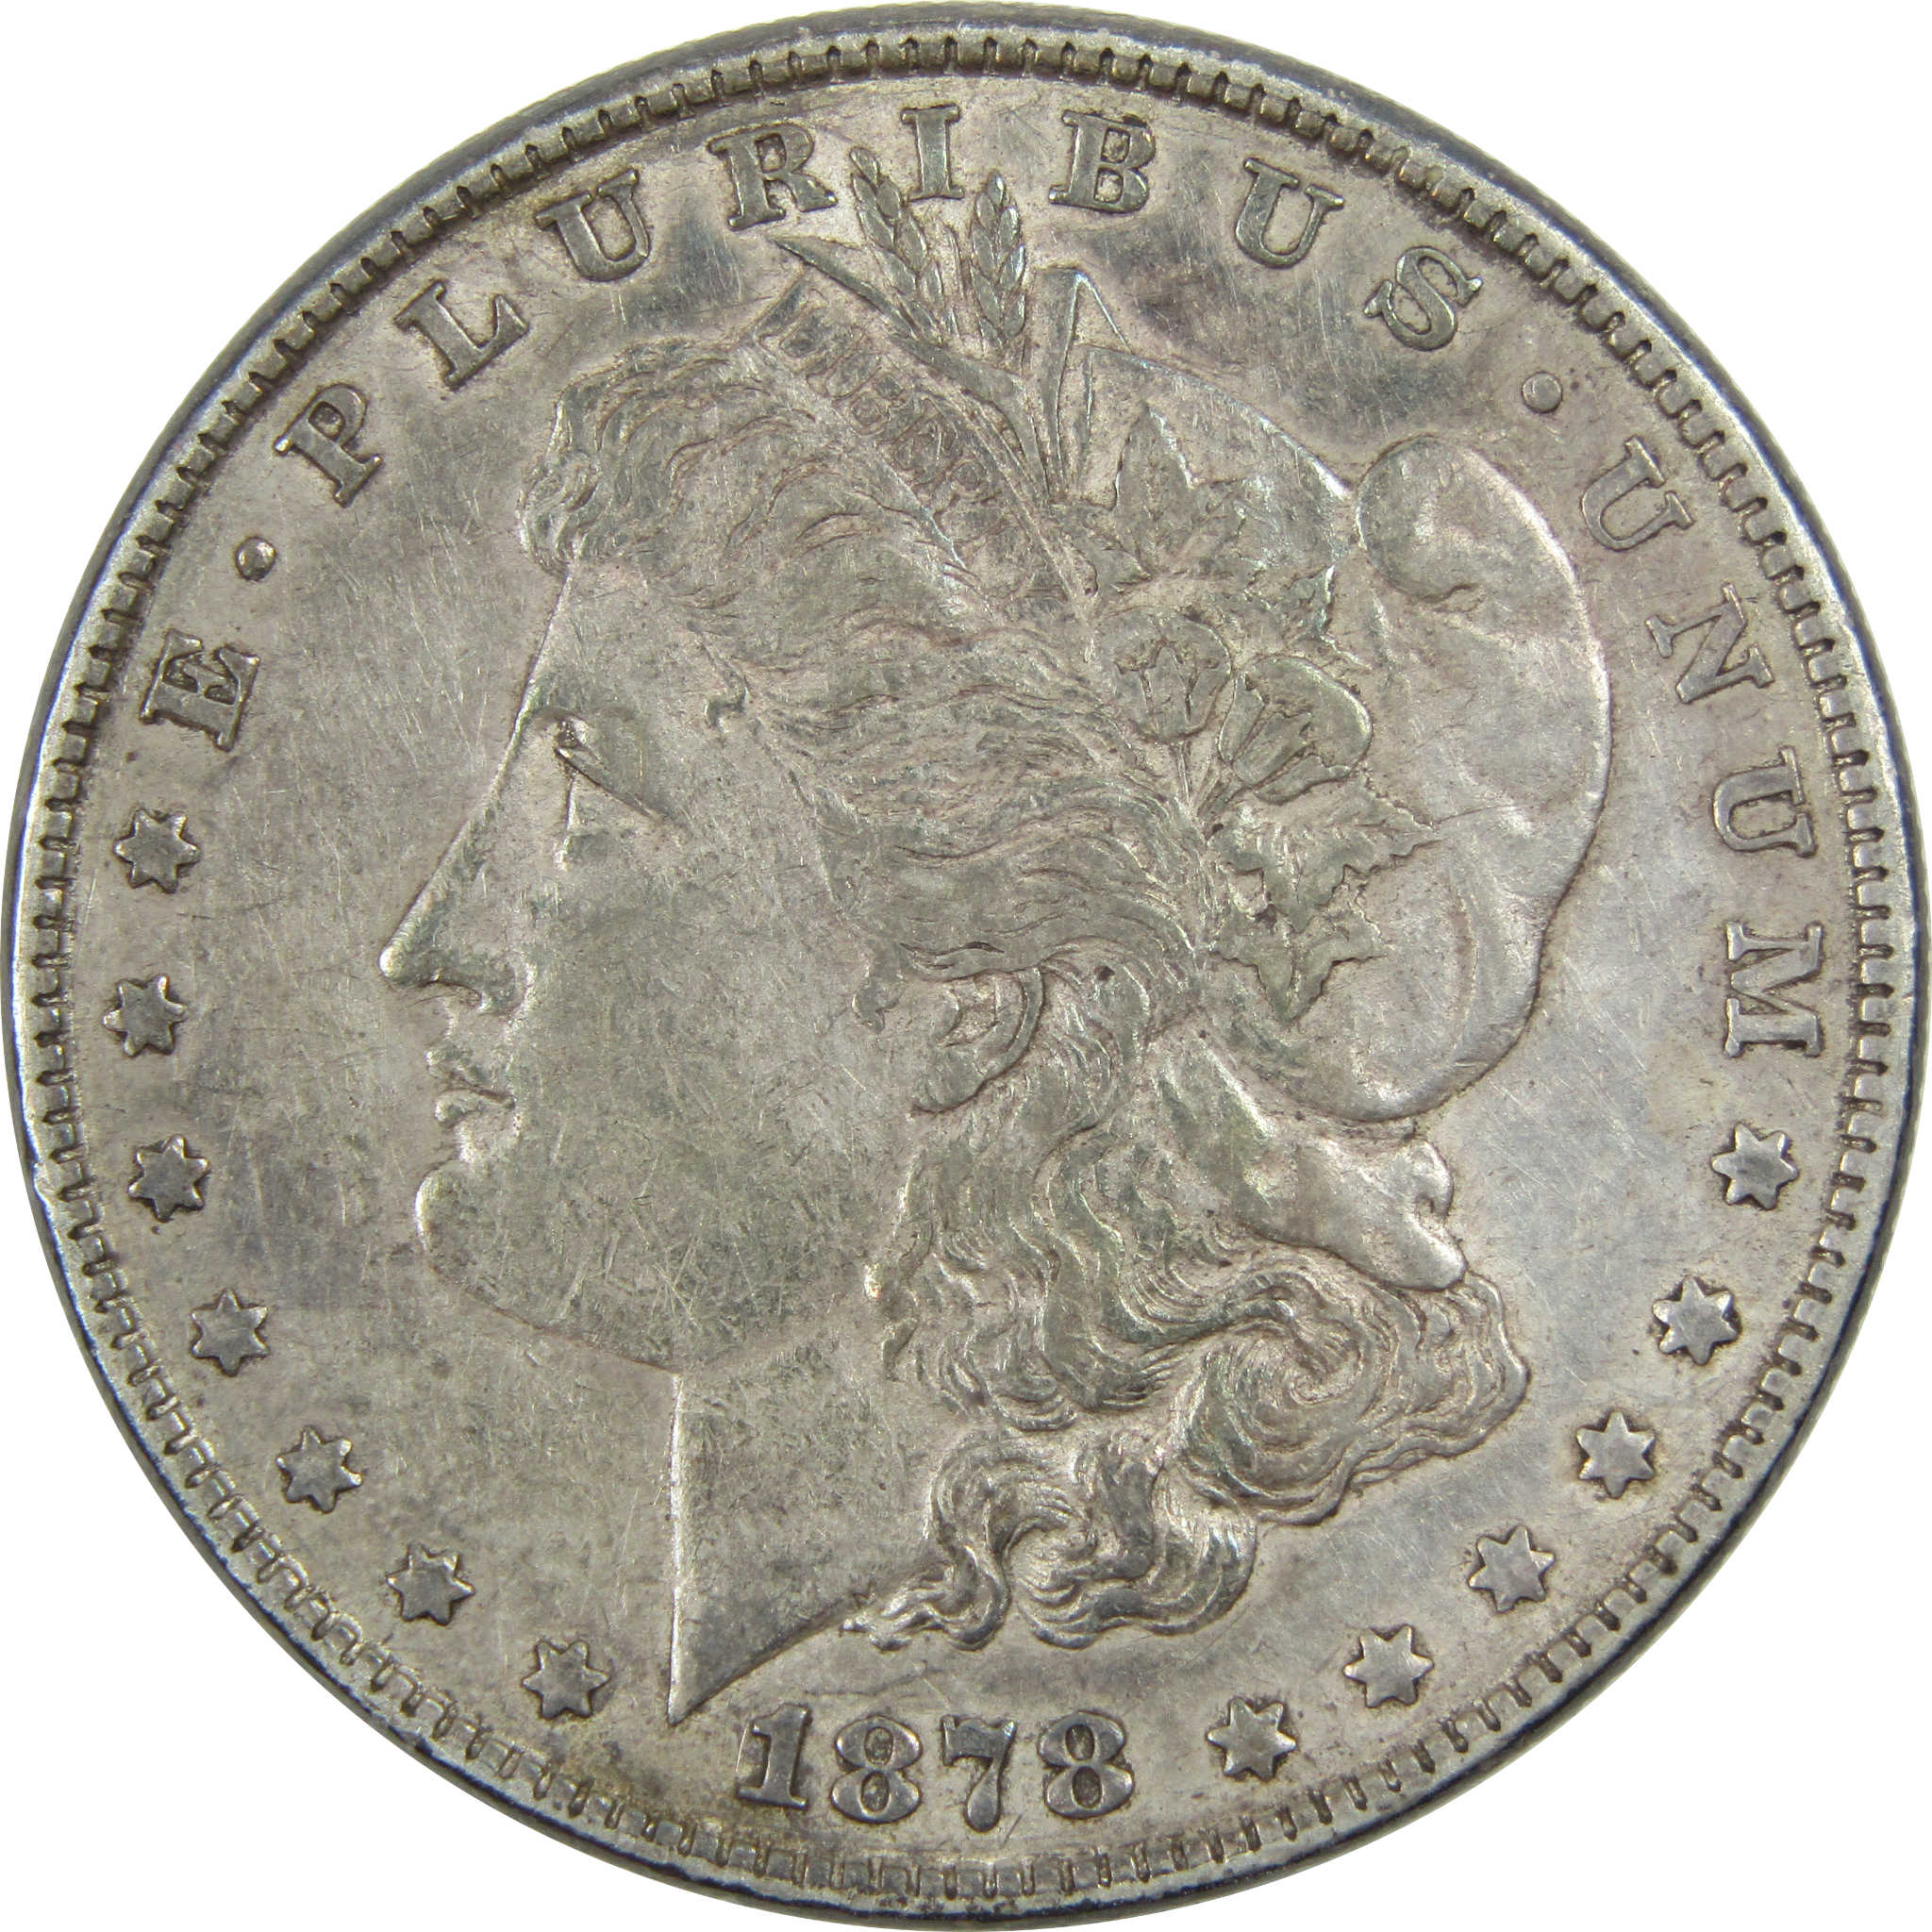 1878 7TF Rev 78 Morgan Dollar XF EF Extremely Fine Silver SKU:I13364 - Morgan coin - Morgan silver dollar - Morgan silver dollar for sale - Profile Coins &amp; Collectibles